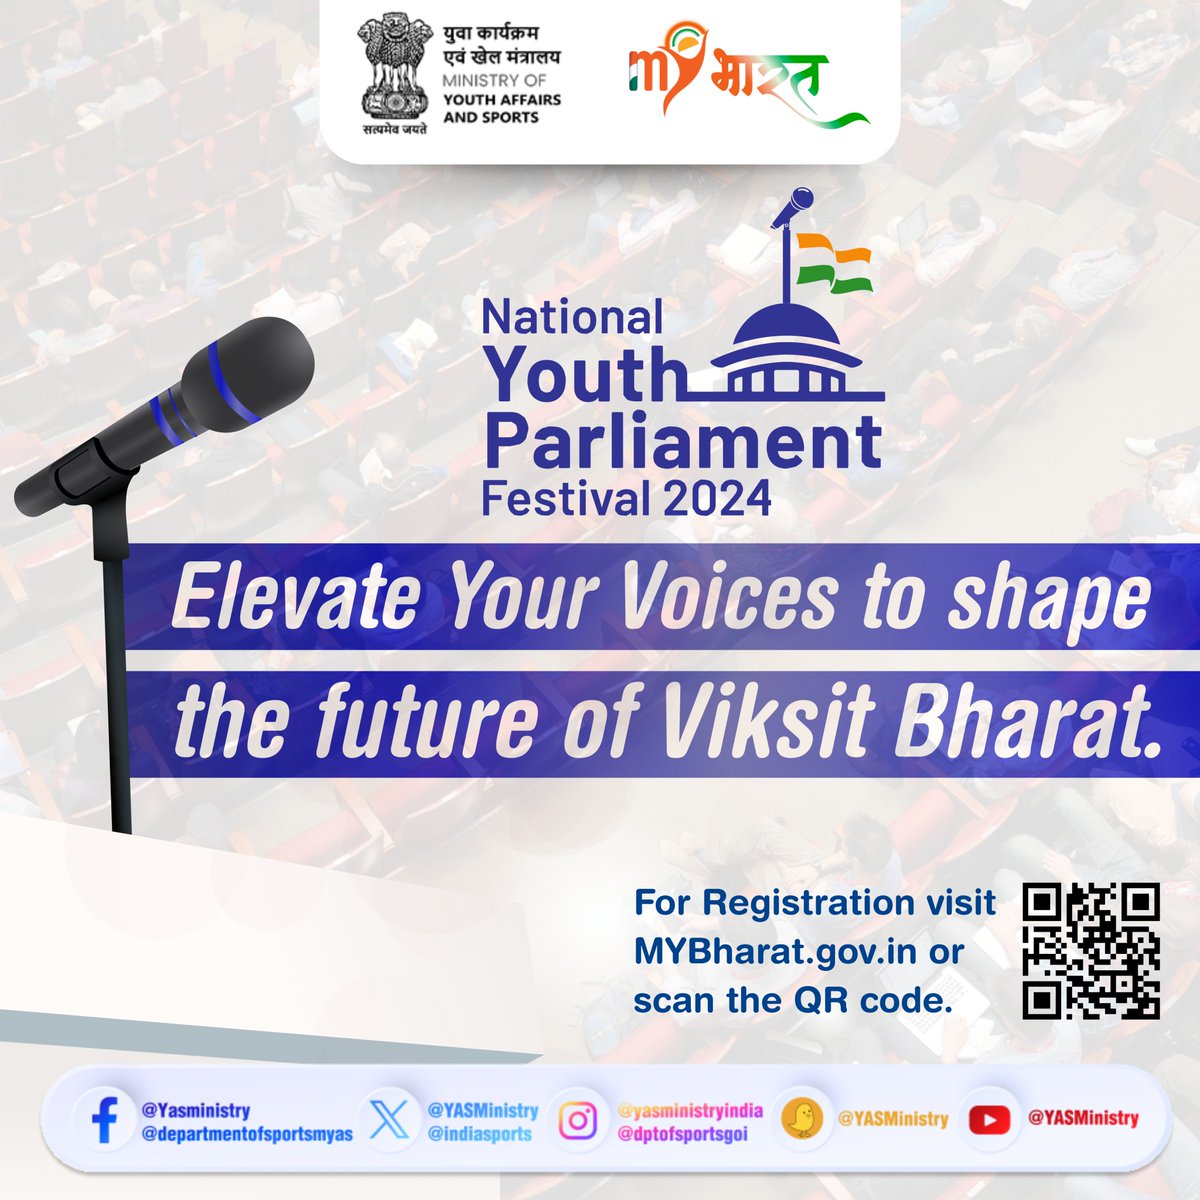 Gear up for the National Youth Parliament Festival 2024! ⭐️ Elevate Your Voices to shape the future of Viksit Bharat. 🇮🇳 For Registration visit mybharat.gov.in or scan the QR code. Stay tuned for more updates. #NYPF2024